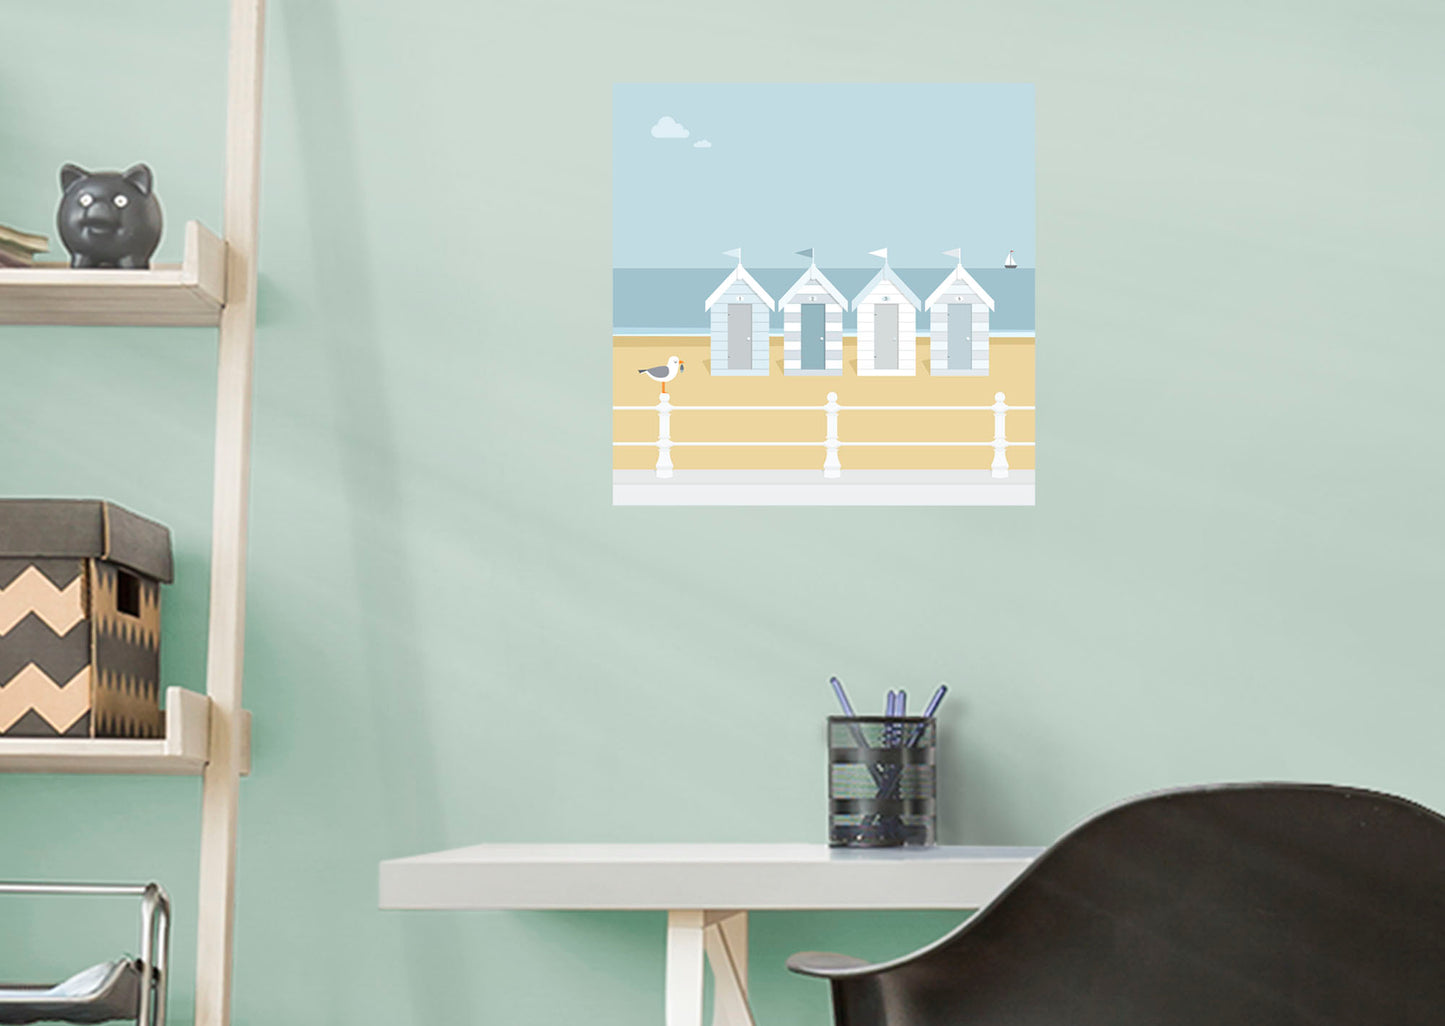 Seasons Decor:  Summer Blue Houses Mural        -   Removable Wall   Adhesive Decal